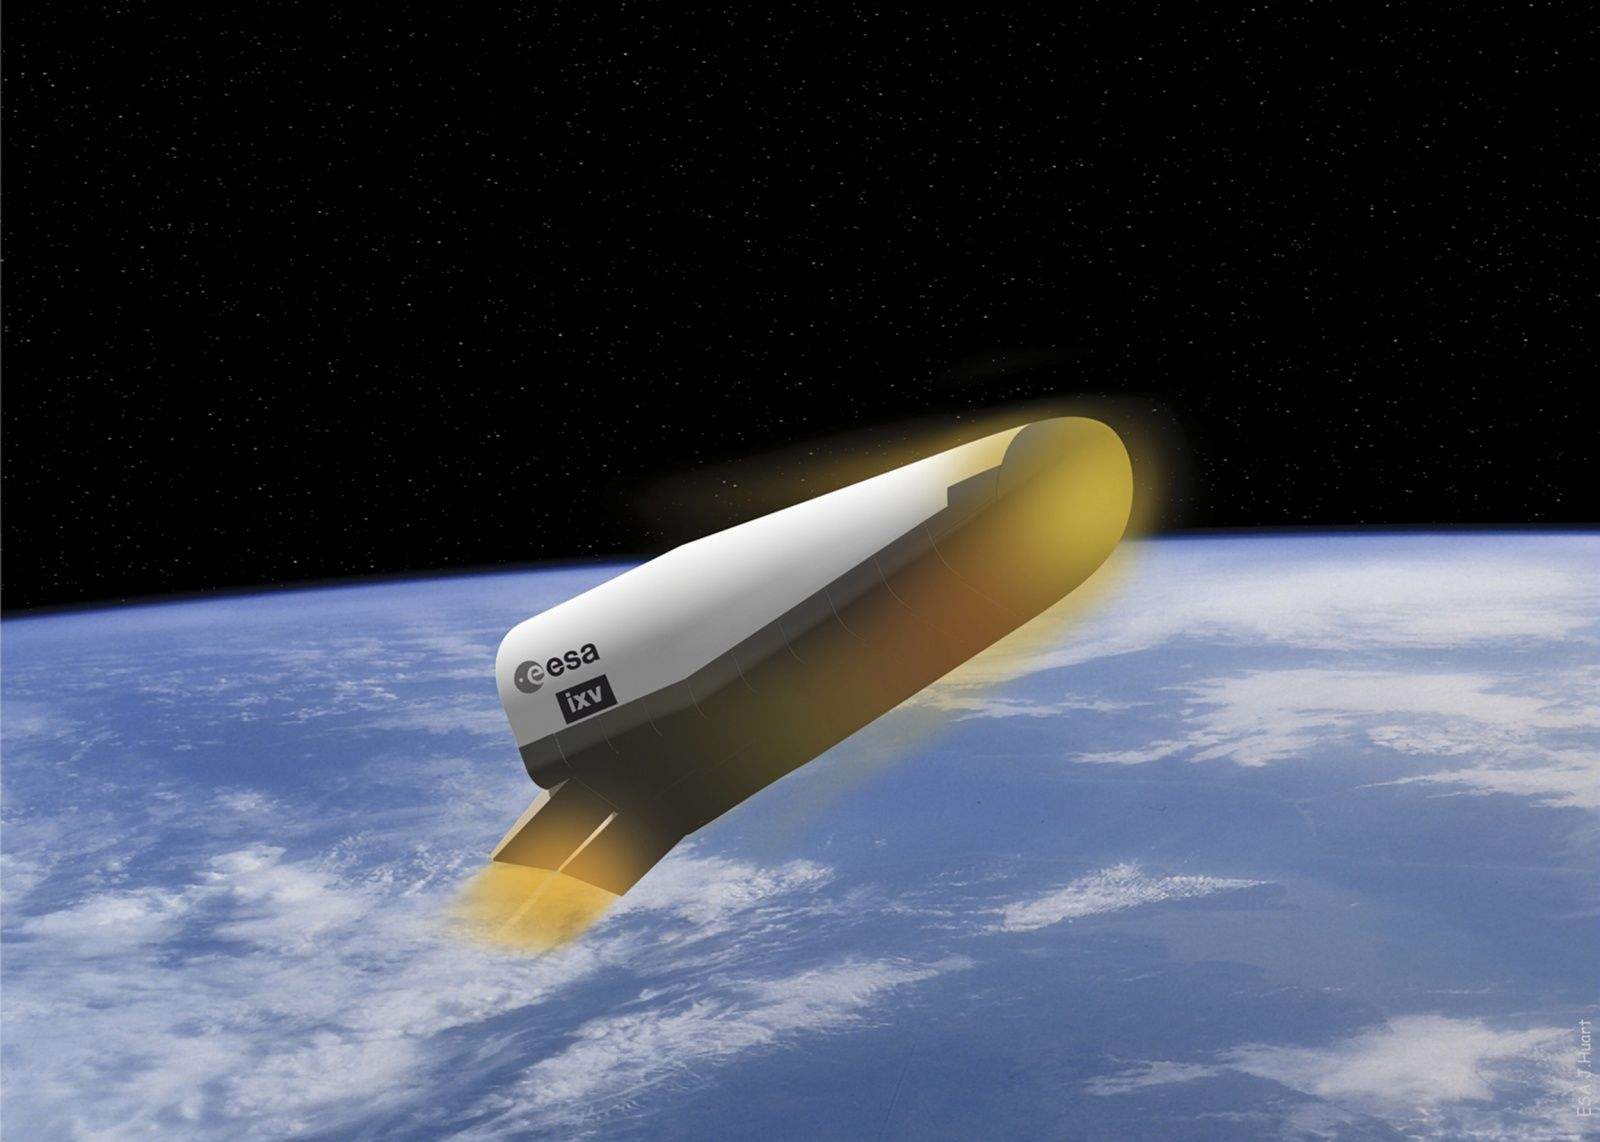 An illustration shows the European Space Agency's Spaceplane on re-entry. A test launch is scheduled for Feb. 11. Illustration: J. Huart/ESA